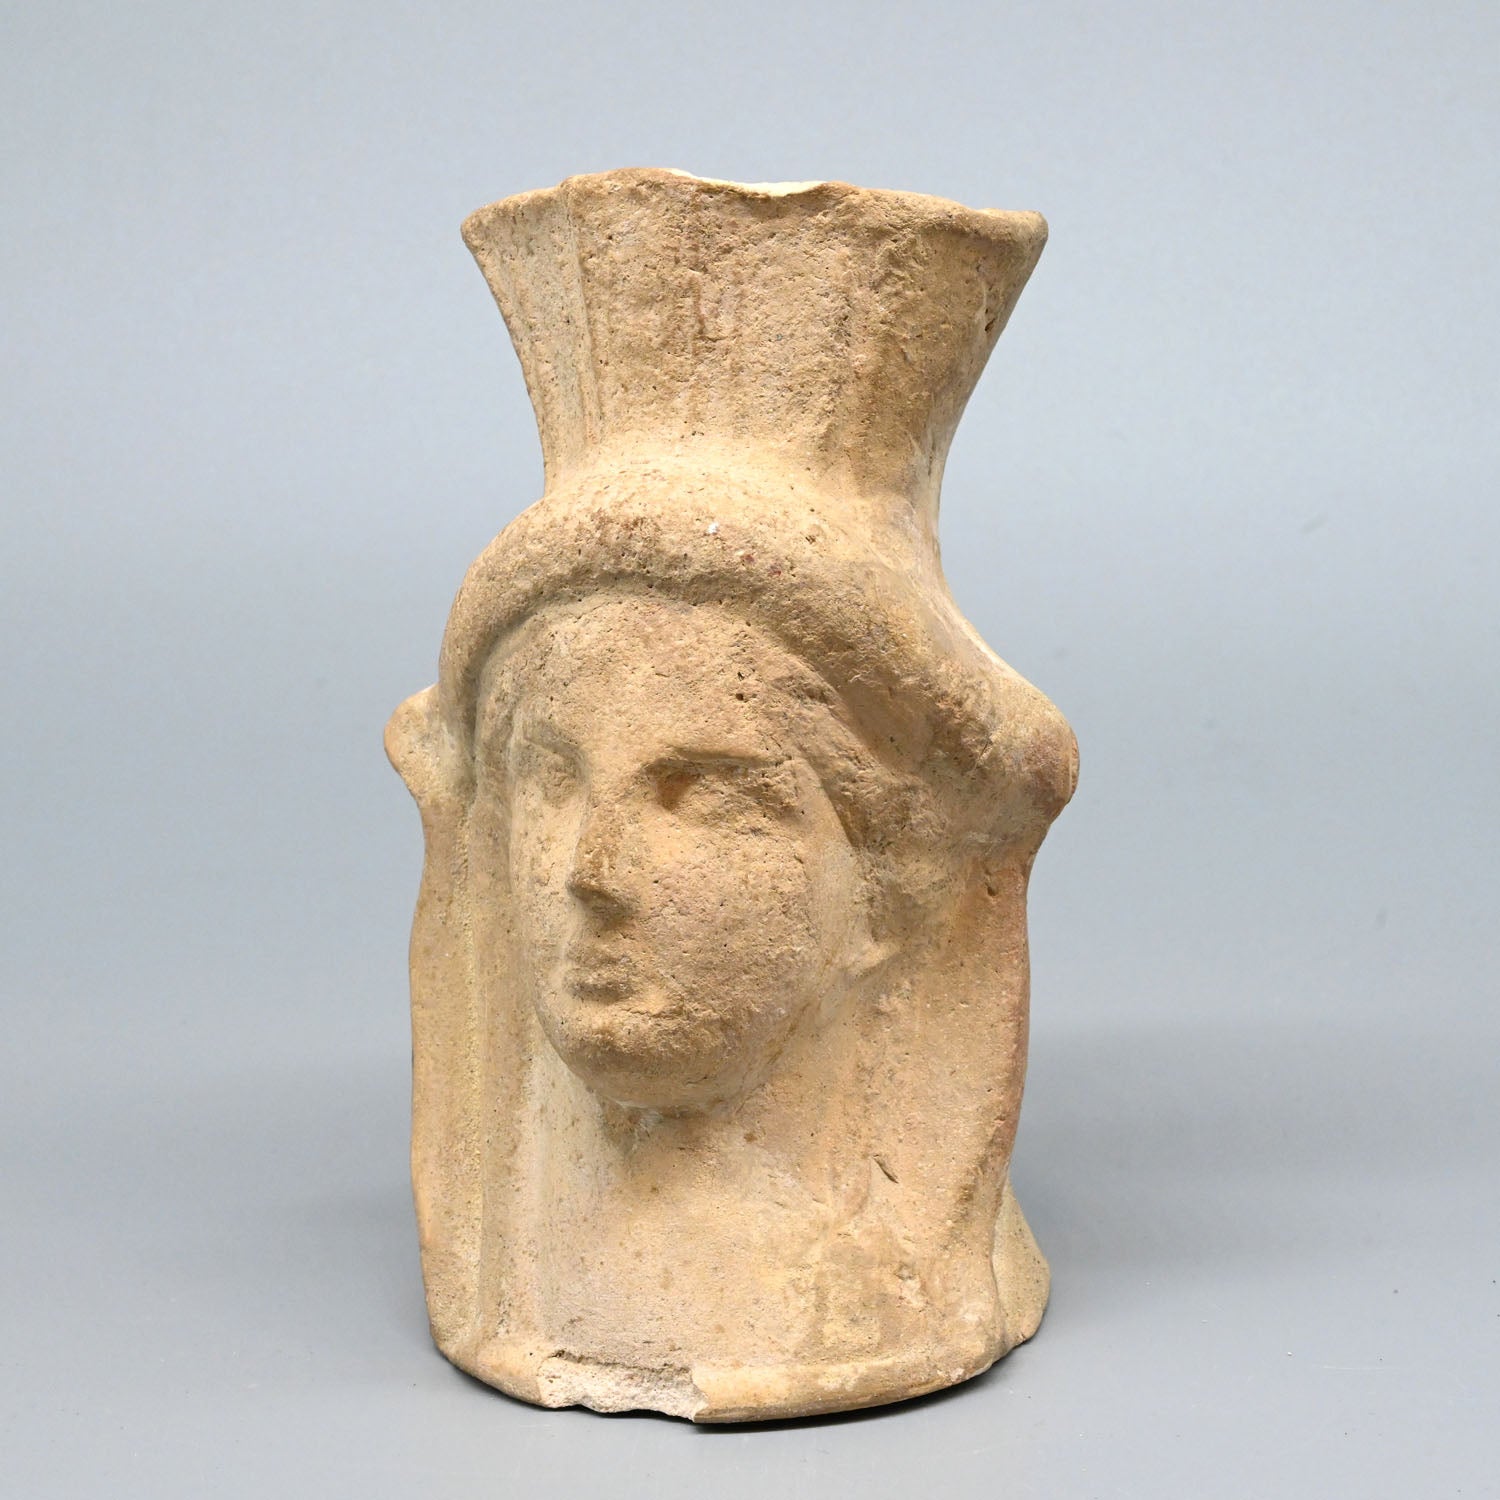 An Apulian Terracotta Protome, Southern Italy, ca. 4th century BCE